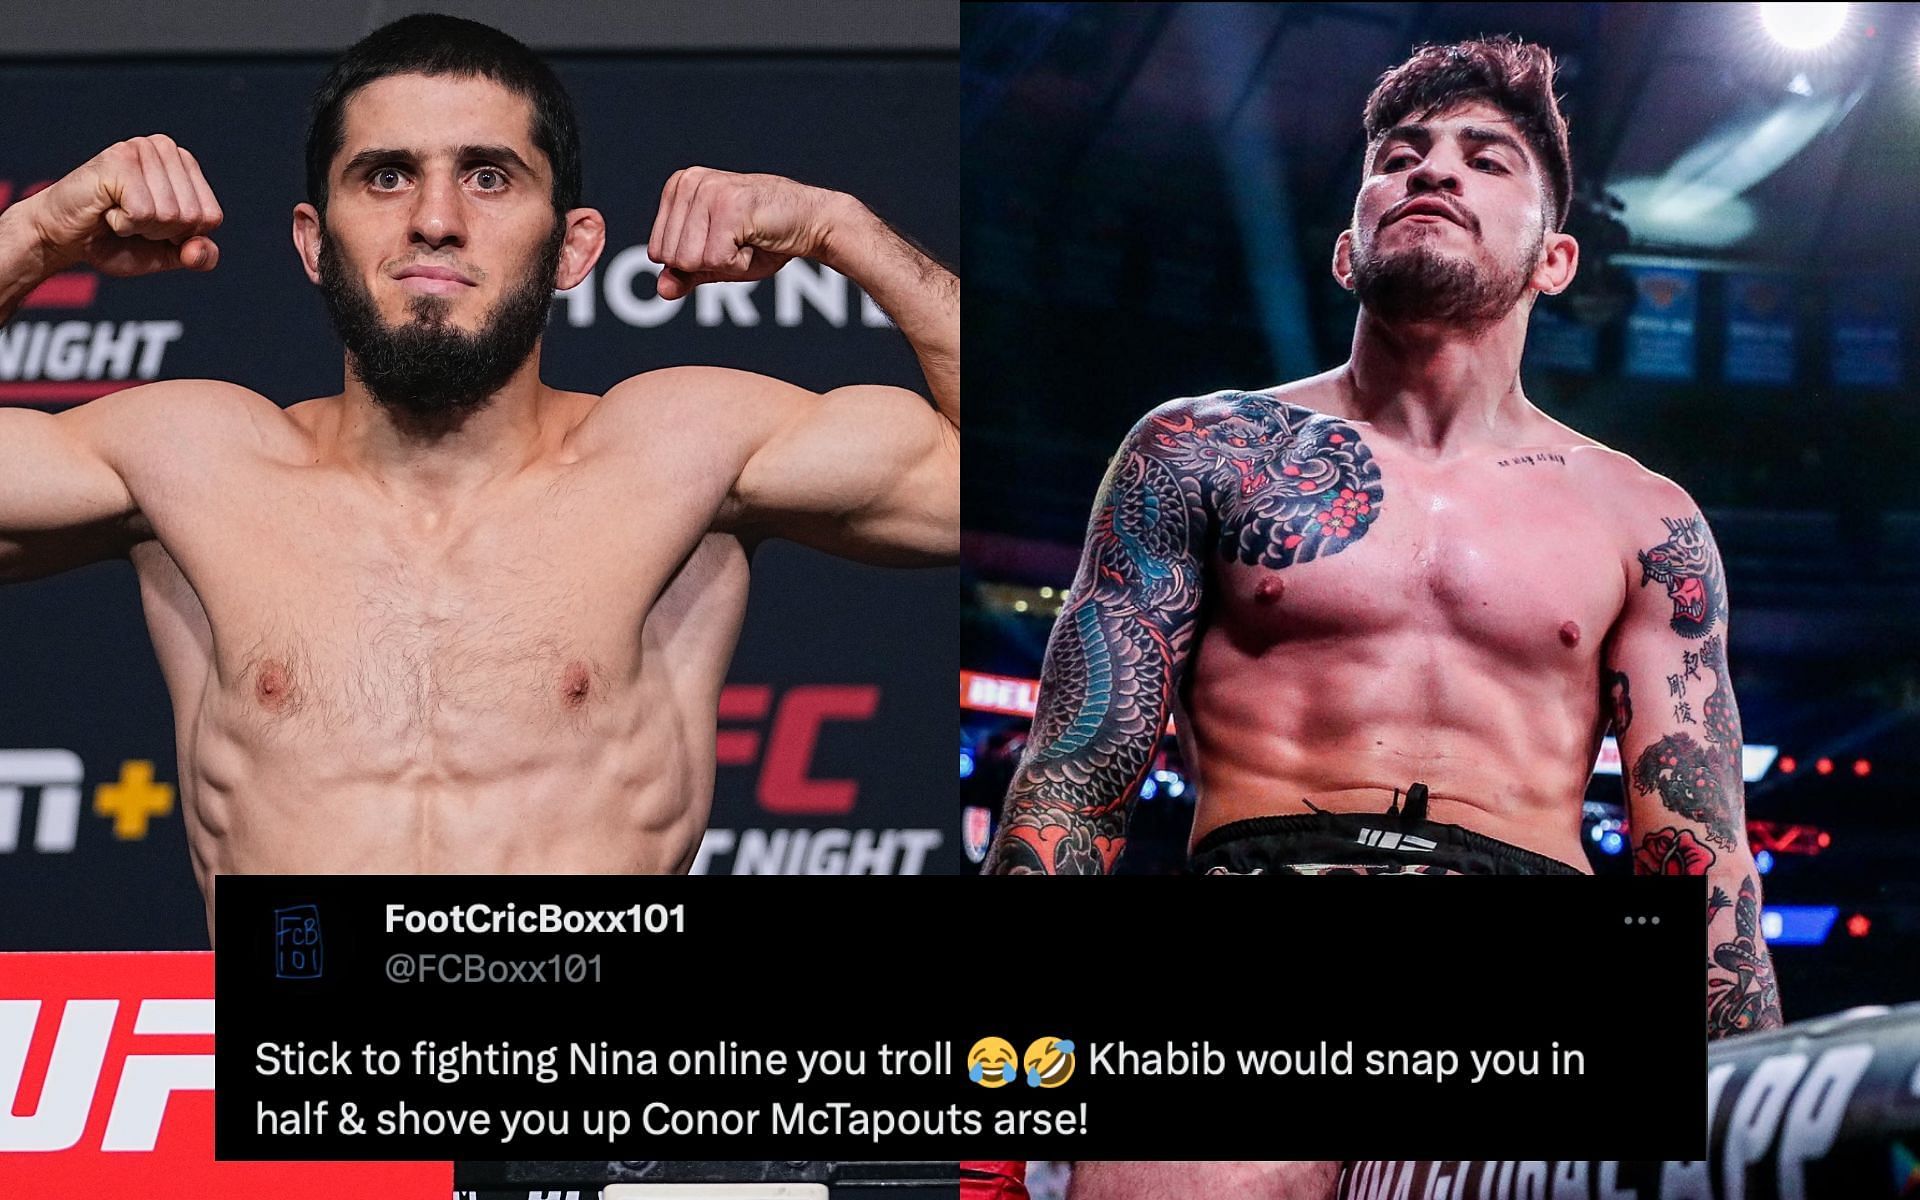 Islam Makhachev and Dillon Danis [Image credits: Getty Images and @dillondanis on Instagram] 